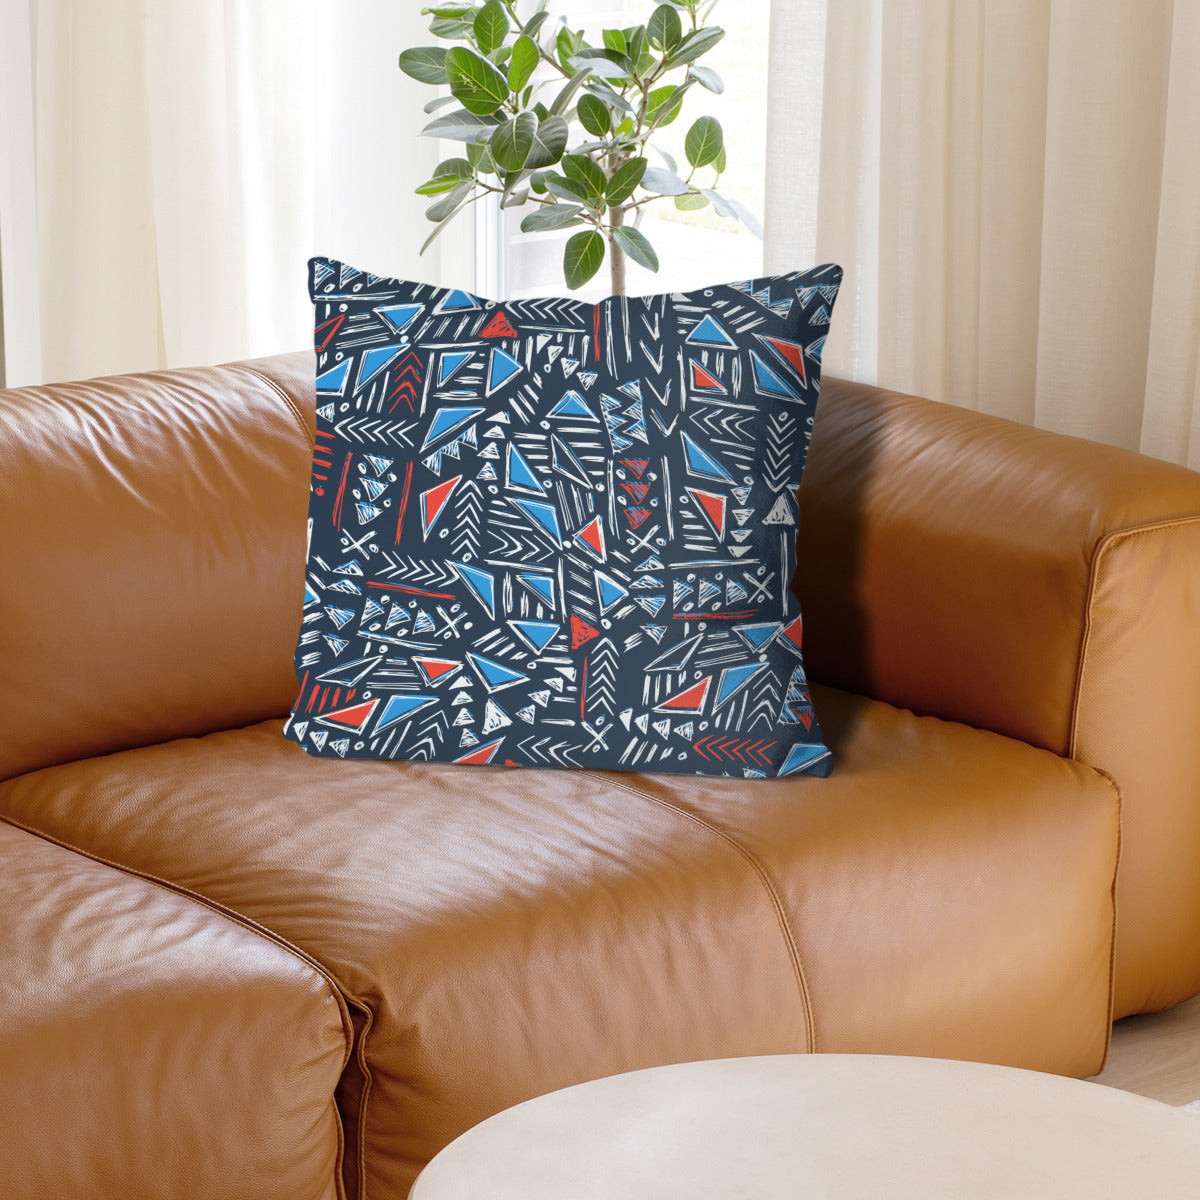 Throw pillow colorful background